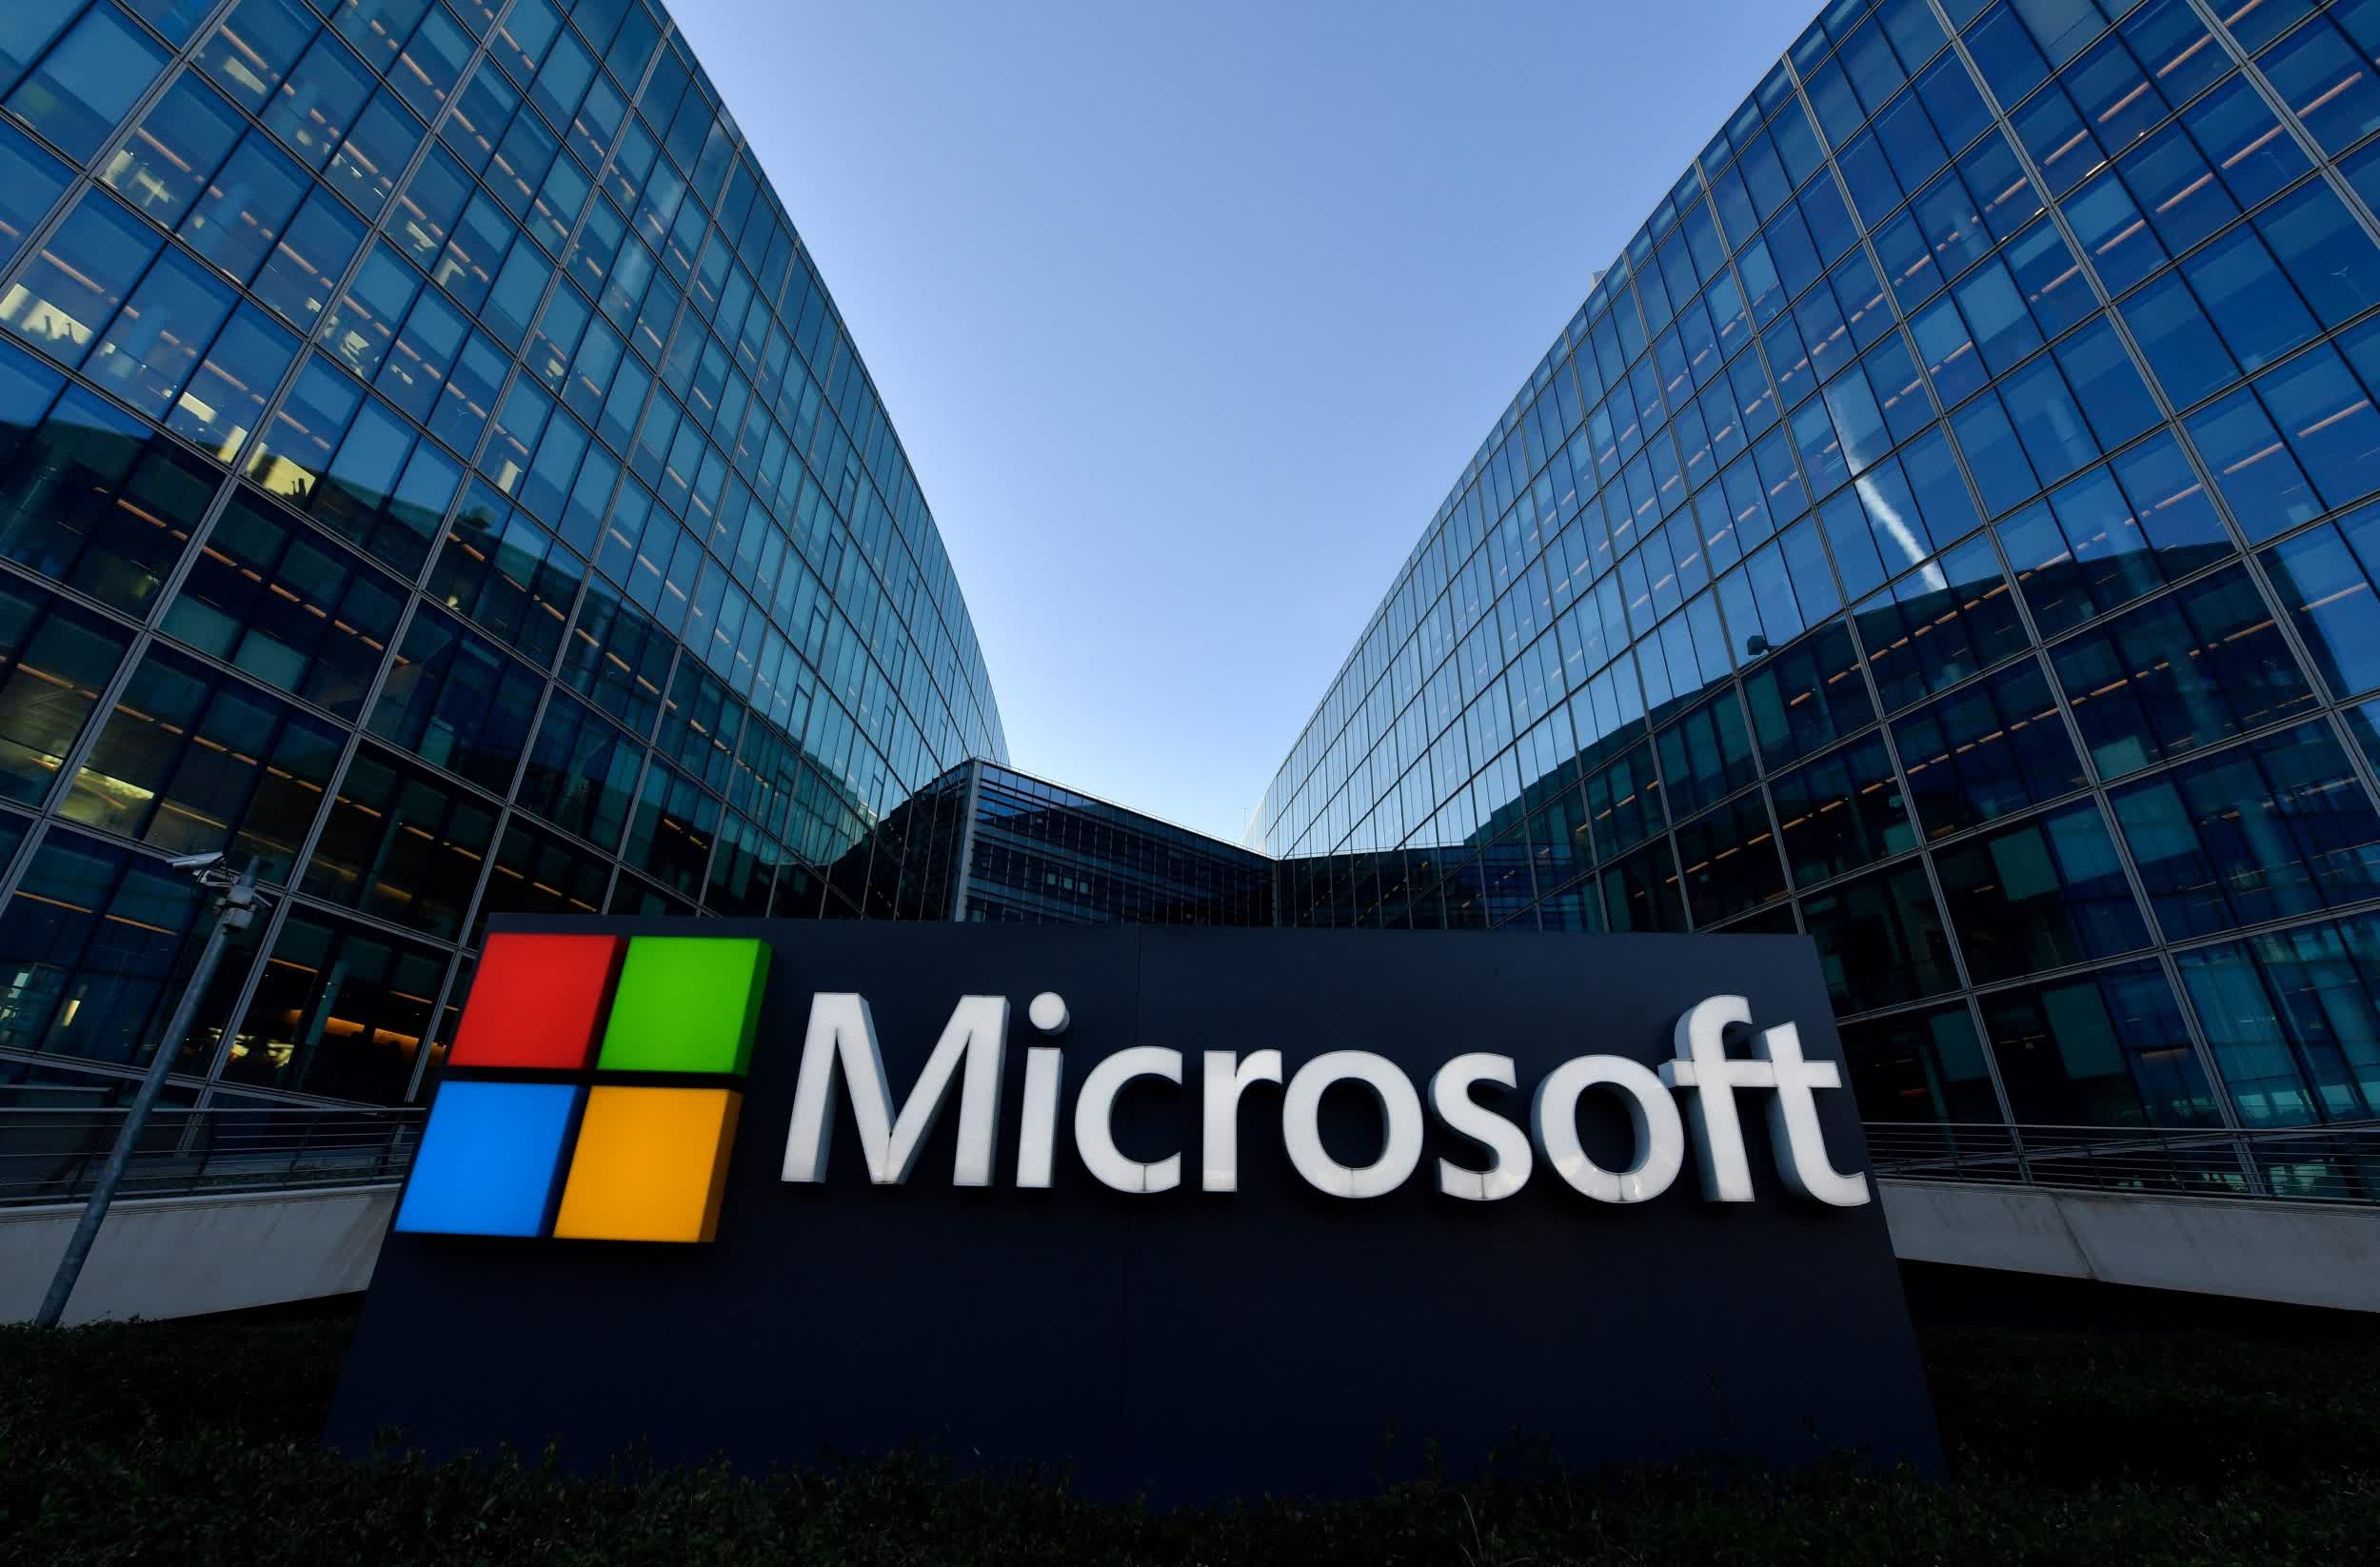 Microsoft looks set to eliminate 10,000 jobs in the next few days